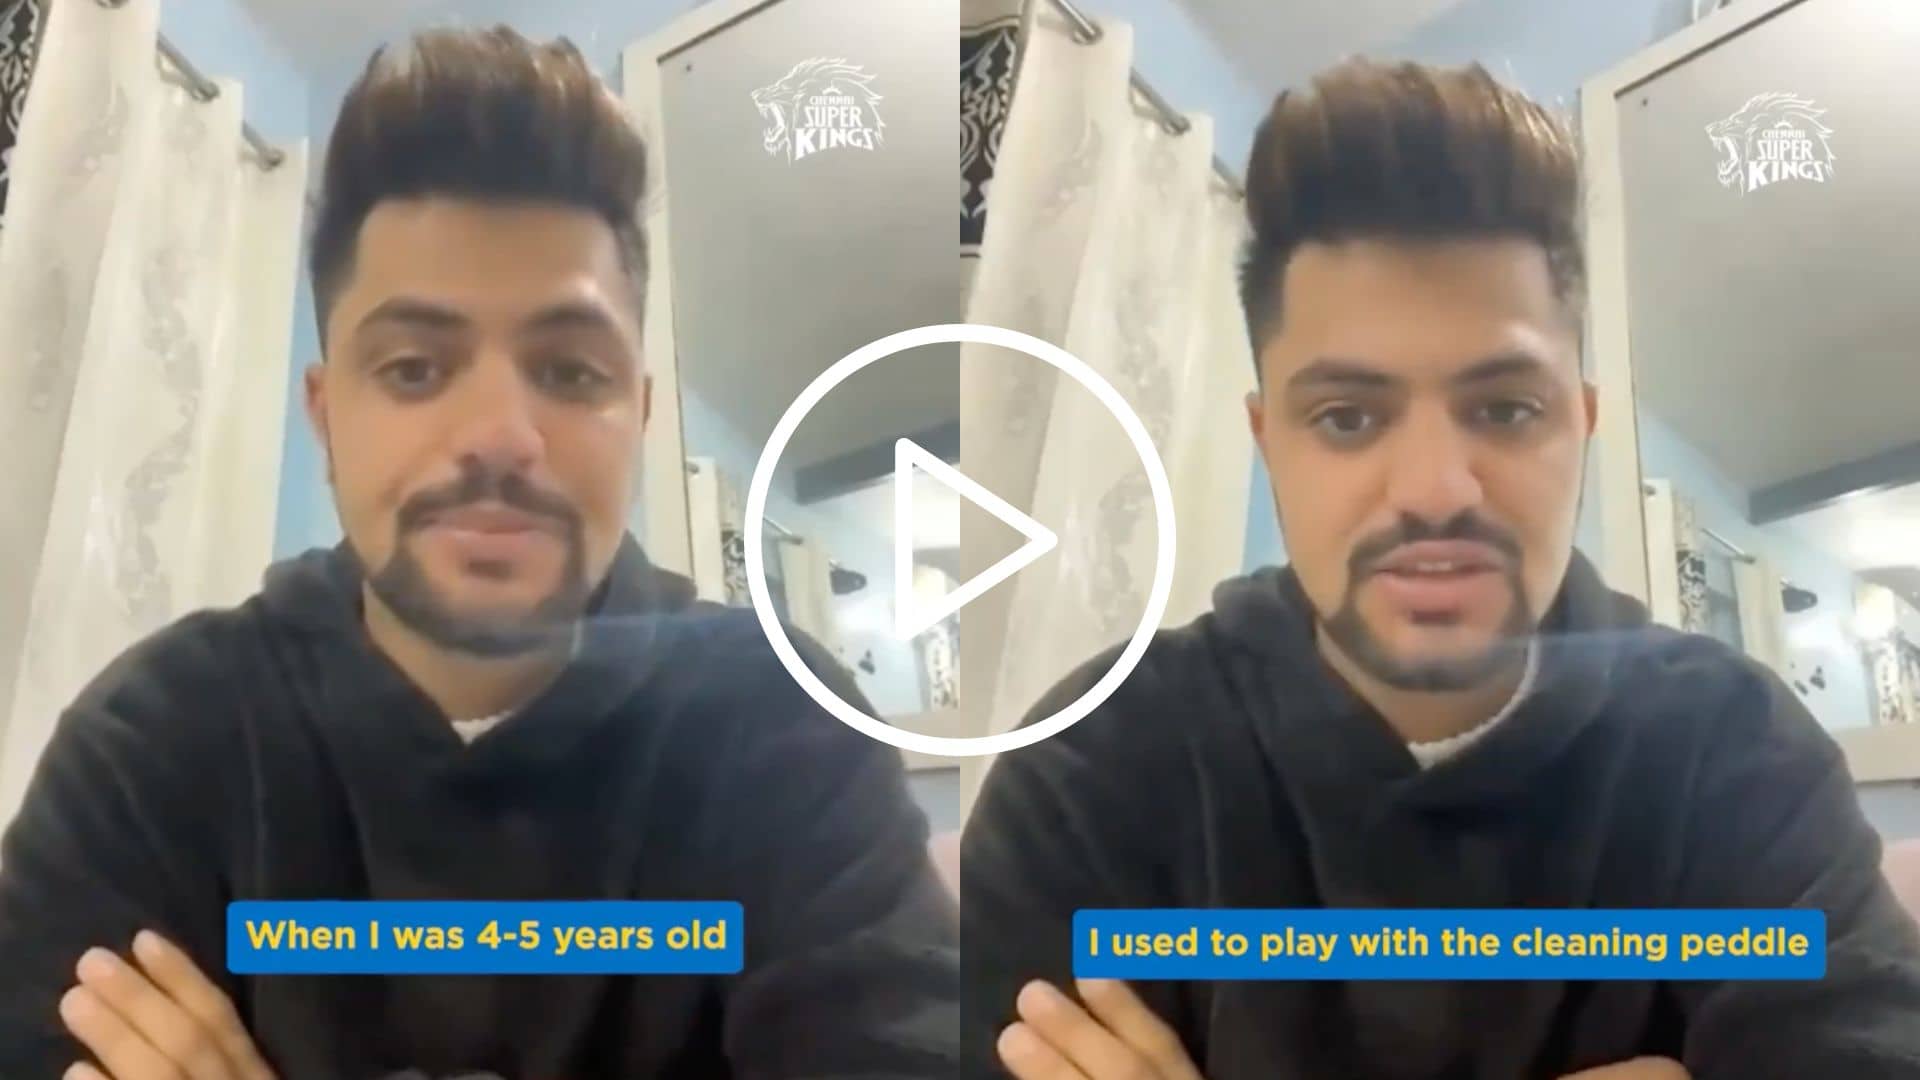 [Watch] 'Used To Play With Cleaning Peddle'- CSK's Sameer Rizvi Shares His Inspirational Journey